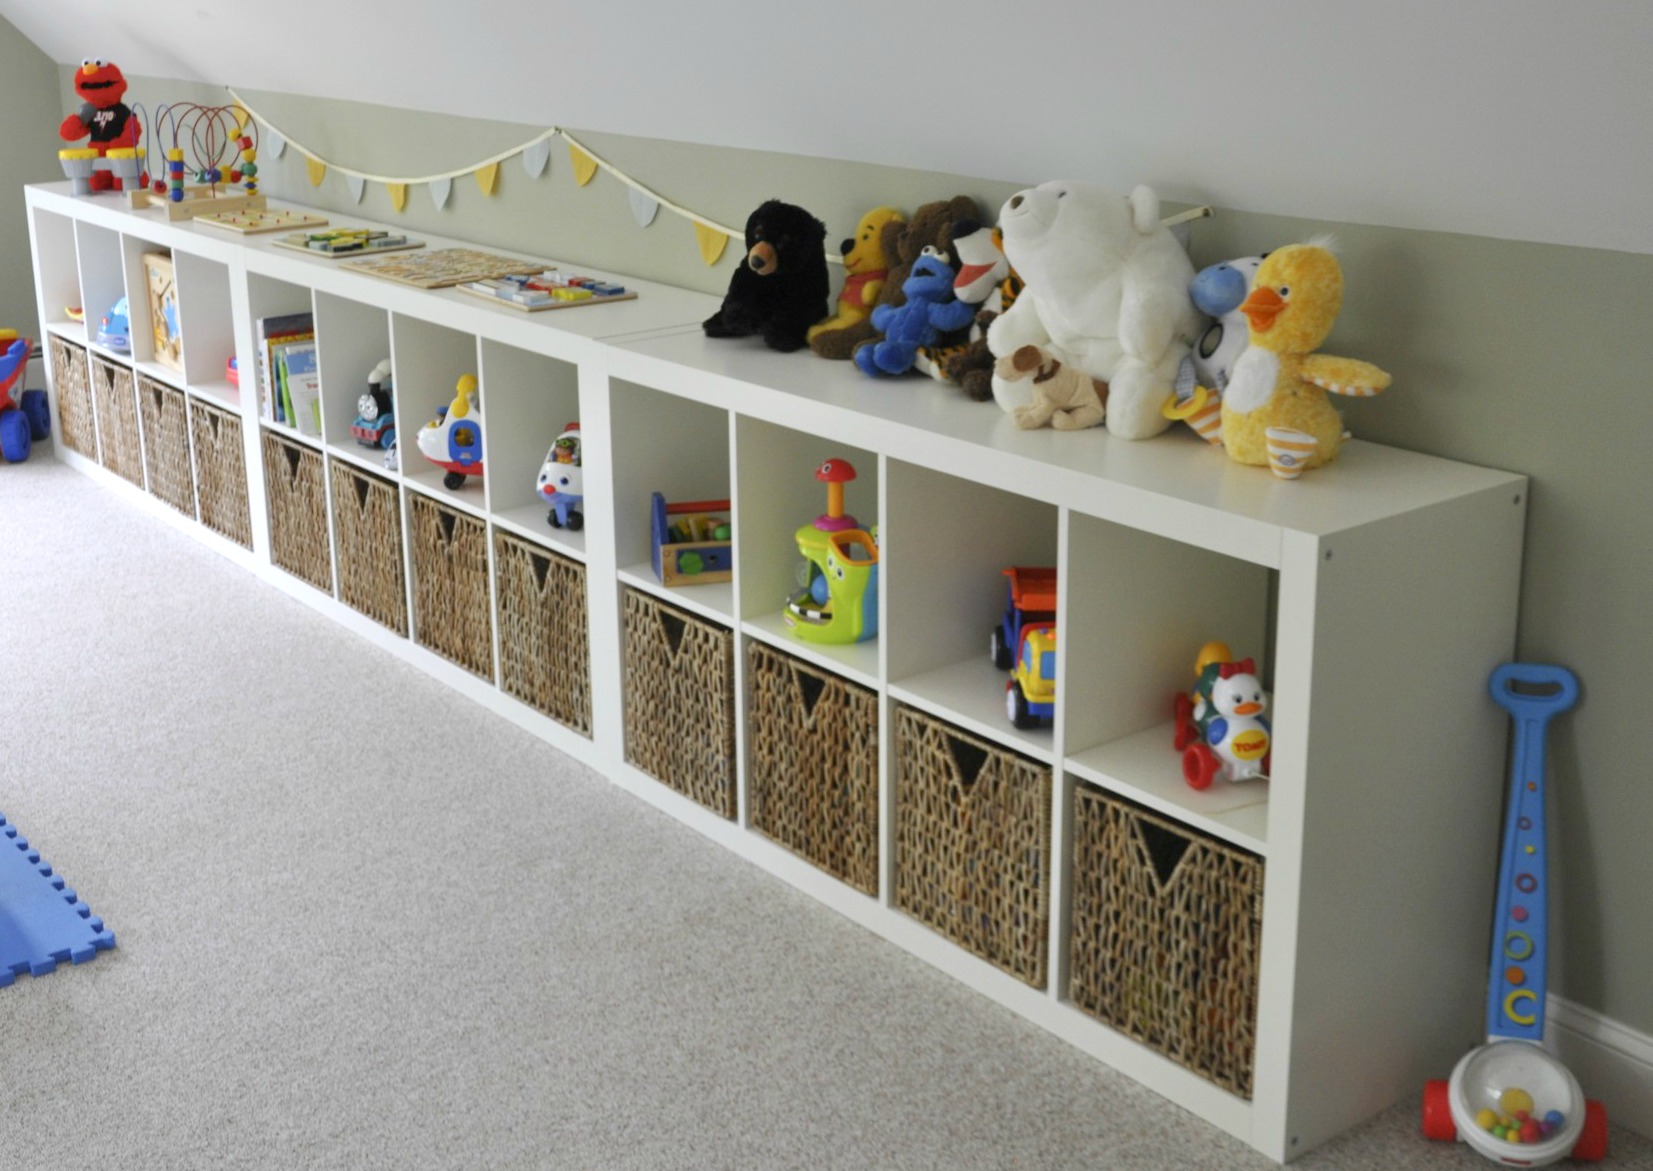 http://www.2sisters2cities.com/wp-content/uploads/2012/07/ikea_expedit_playroom_2.jpg